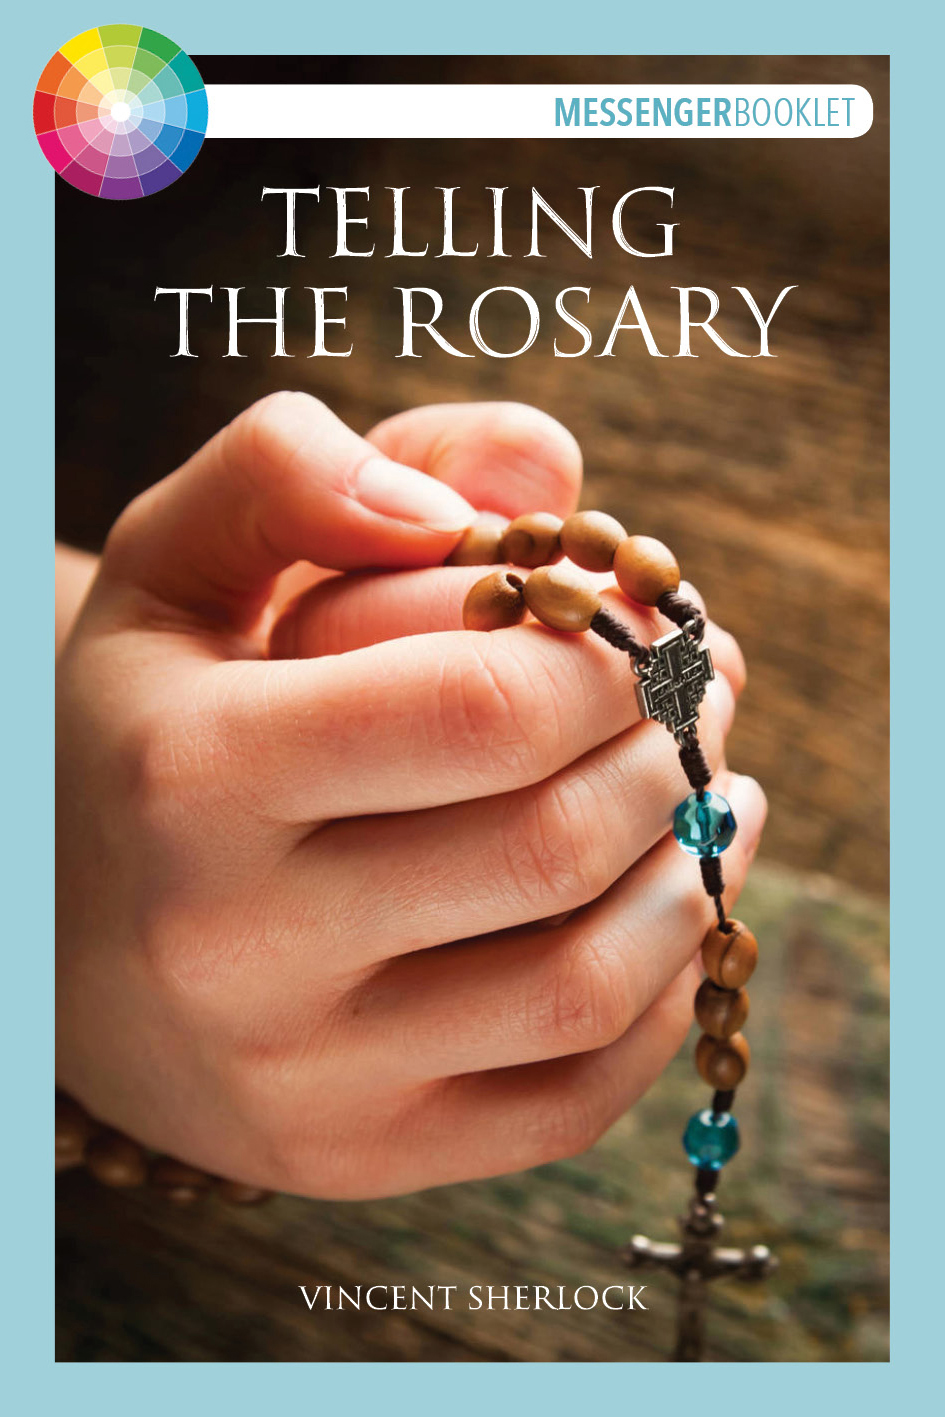 Telling the Rosary (Messenger Booklet)